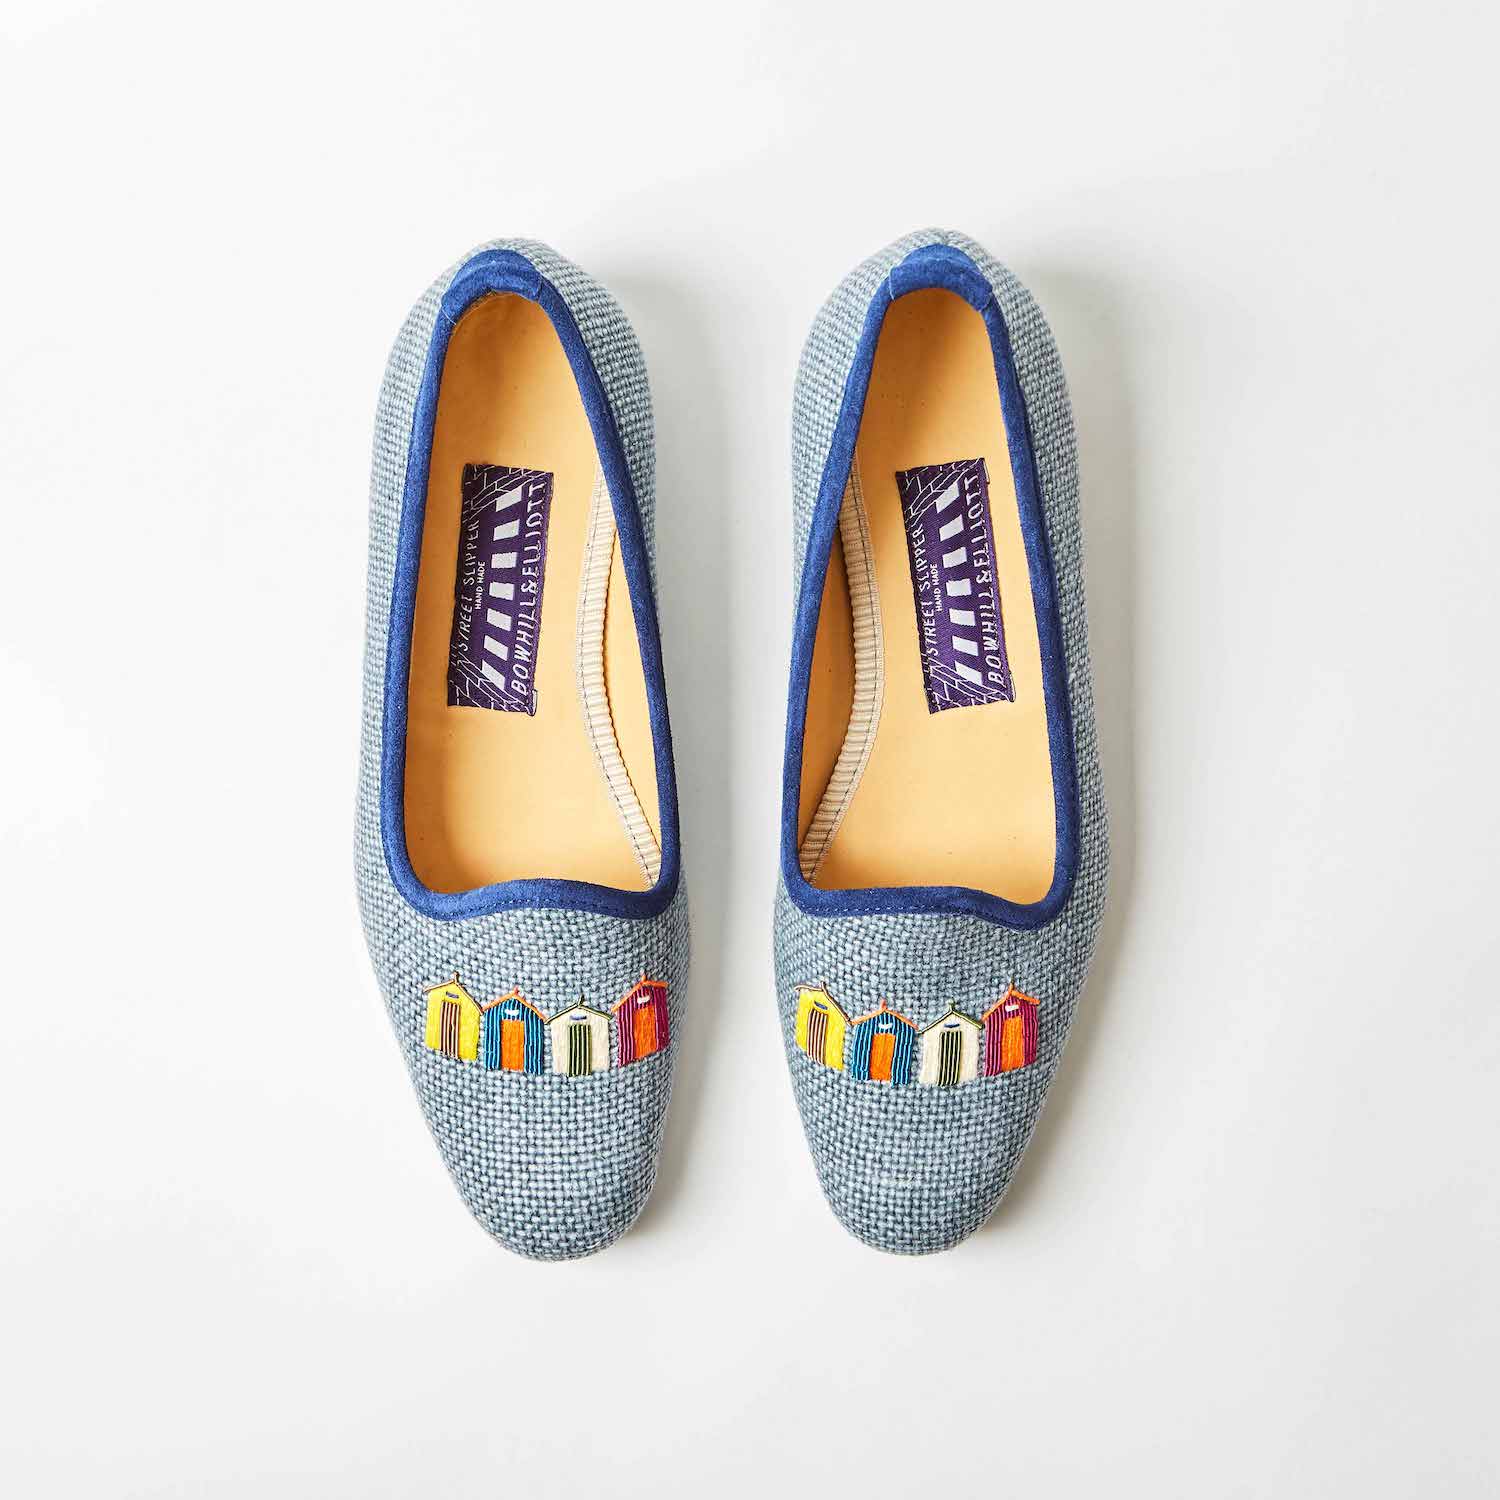 Denim Linen Pumps with Embroidered Beach Huts